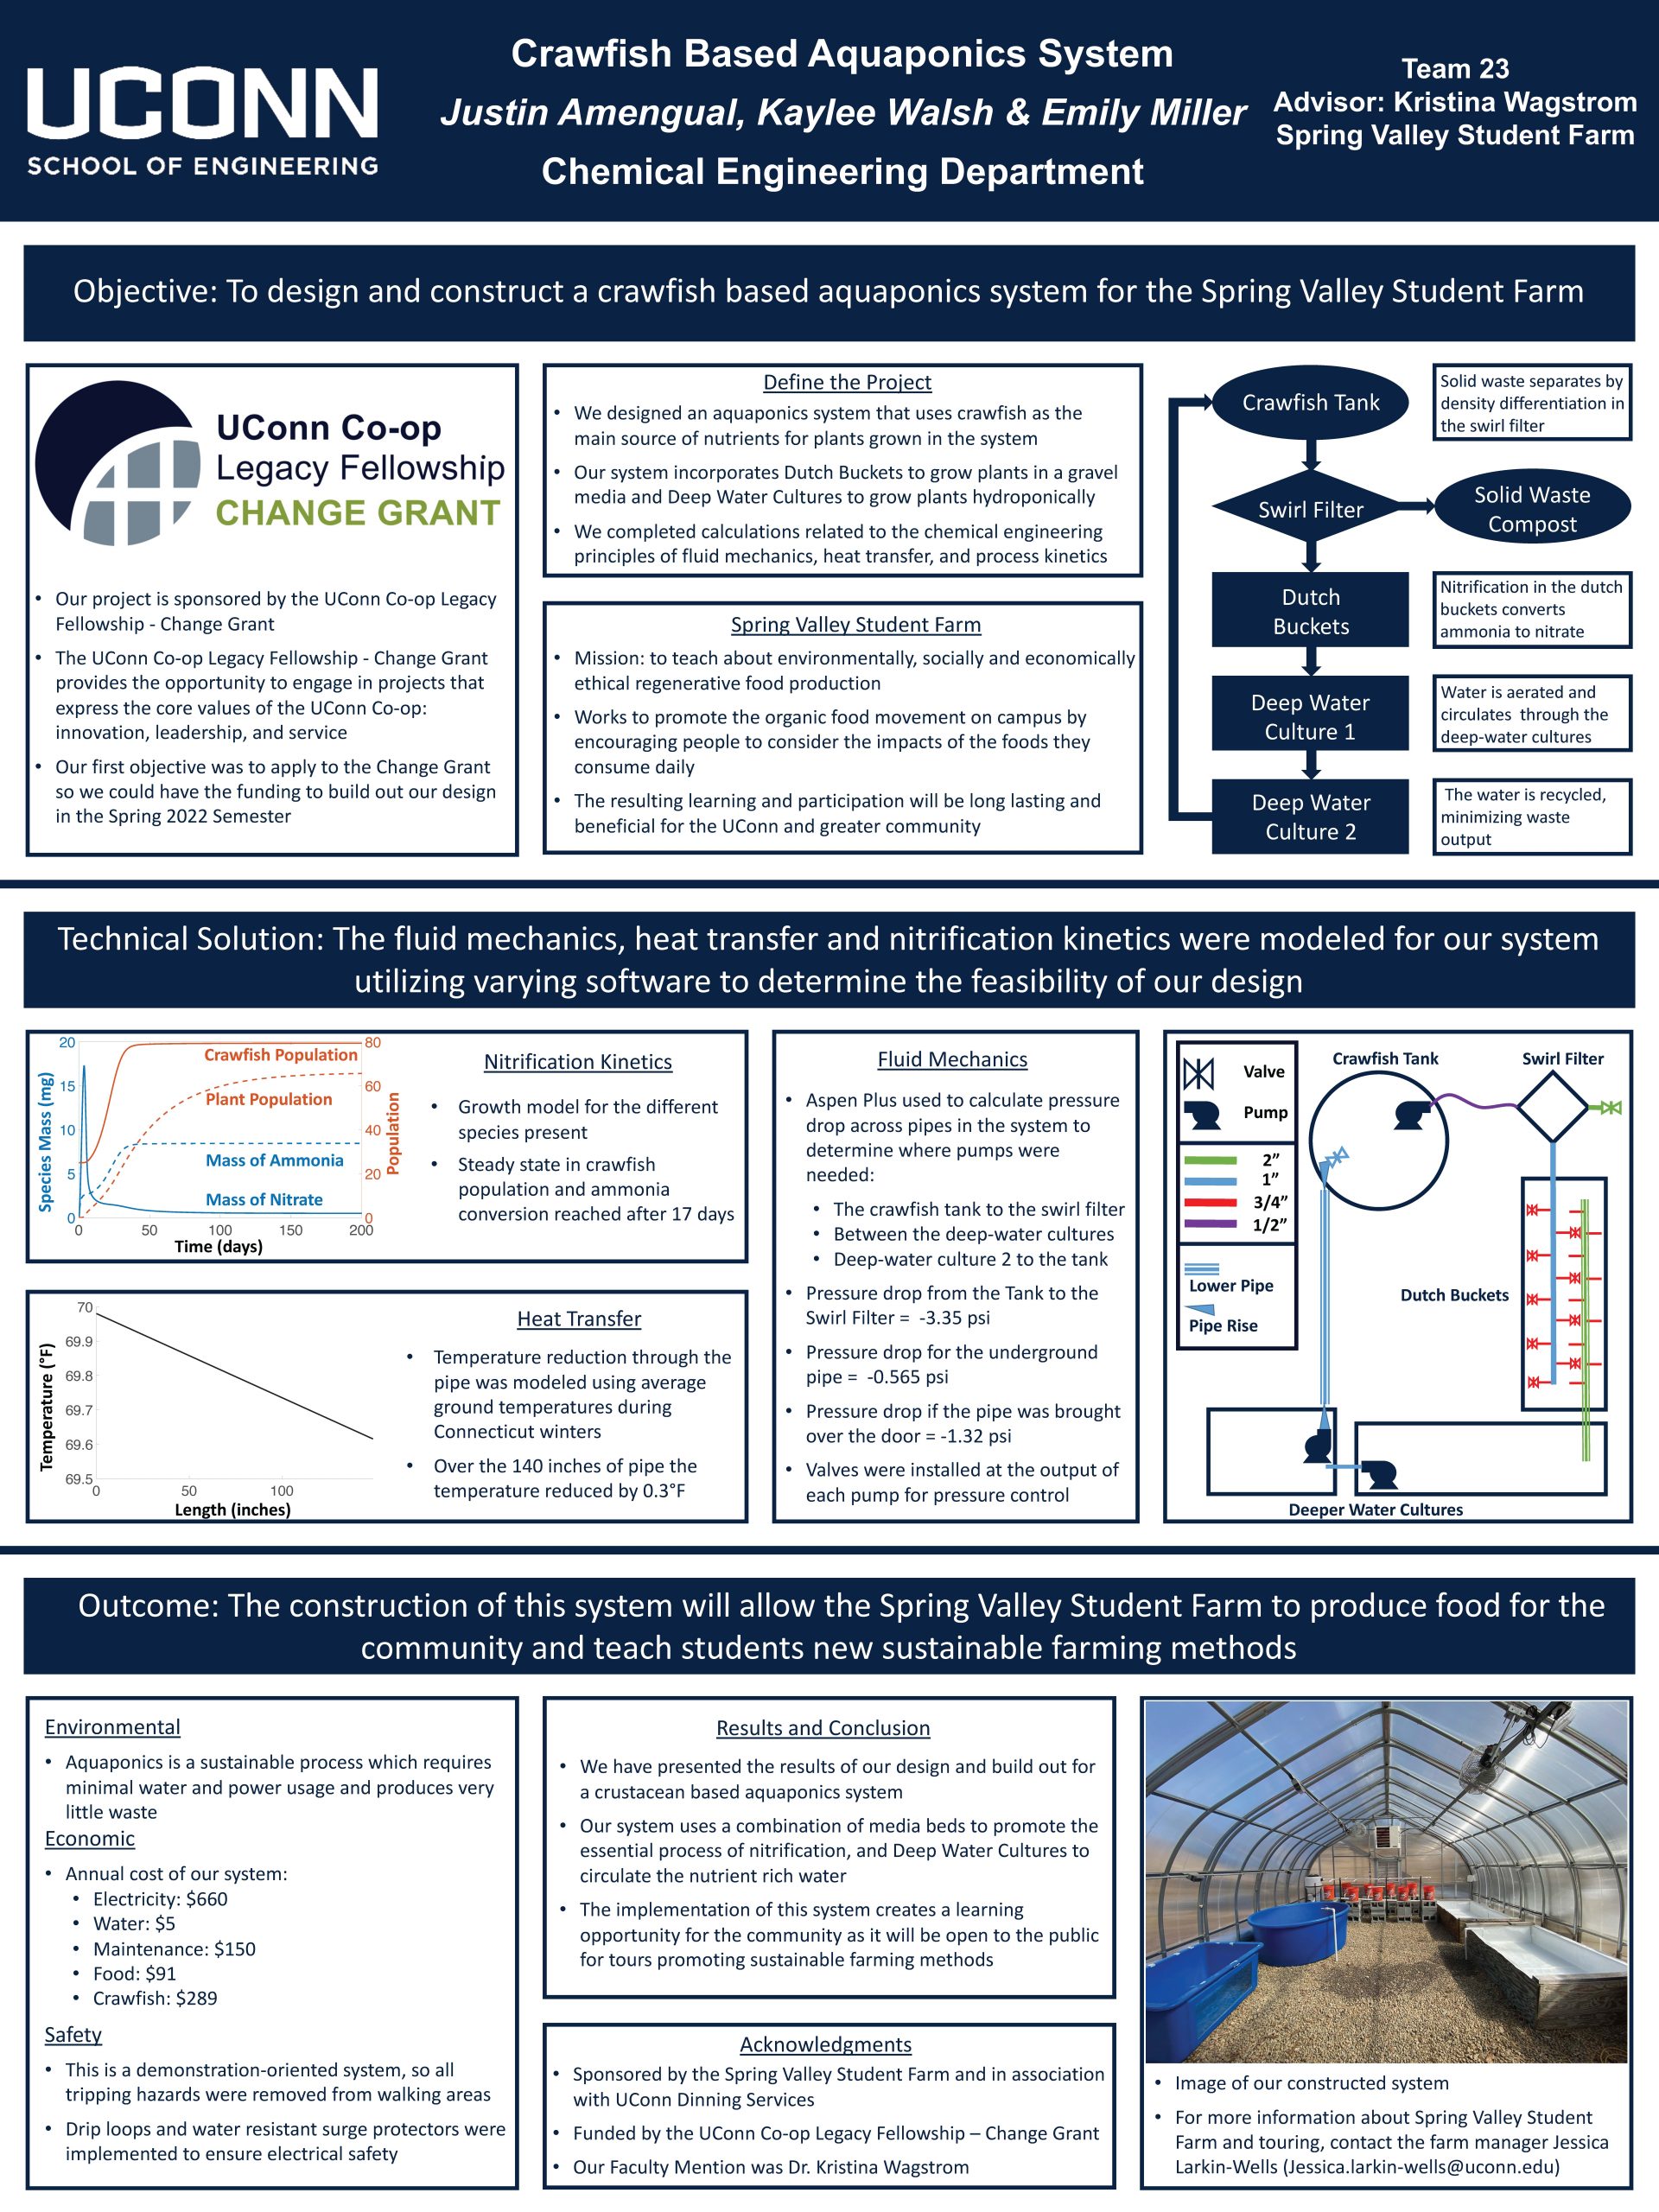 Crawfish Based Aquaponics System research poster. 